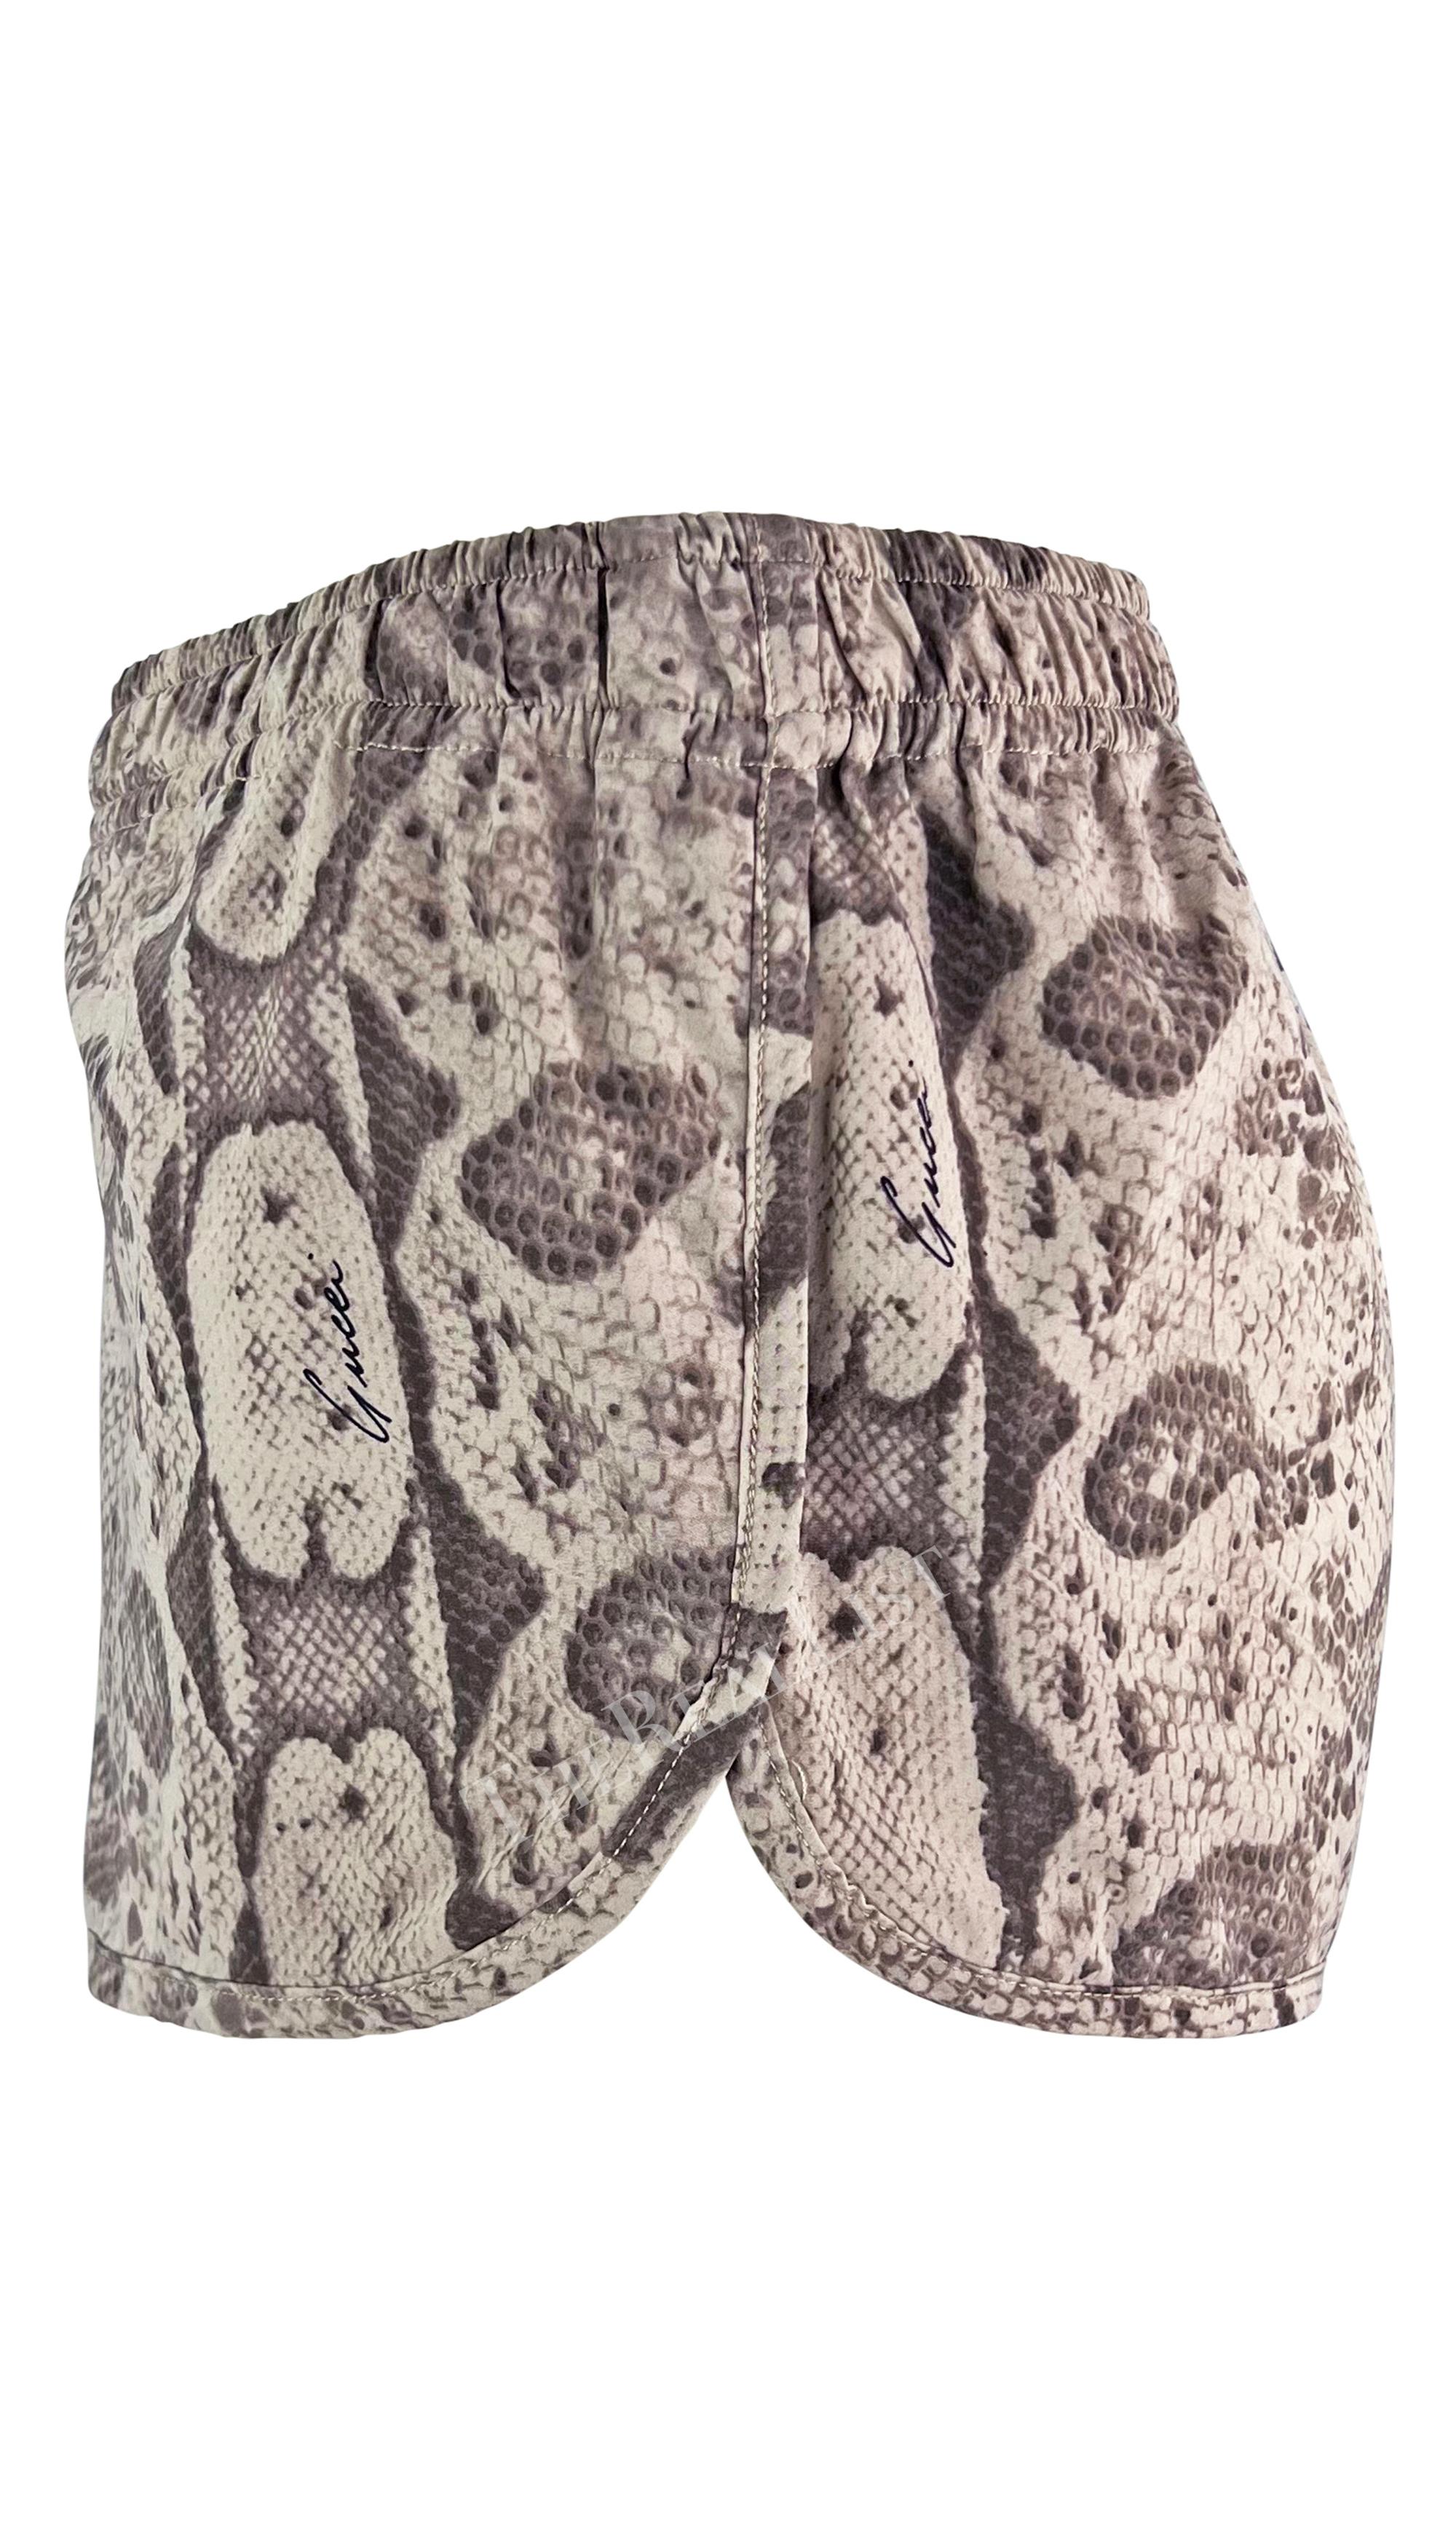 S/S 2000 Gucci by Tom Ford Runway Snake Skin Print Mini Shorts For Sale 4